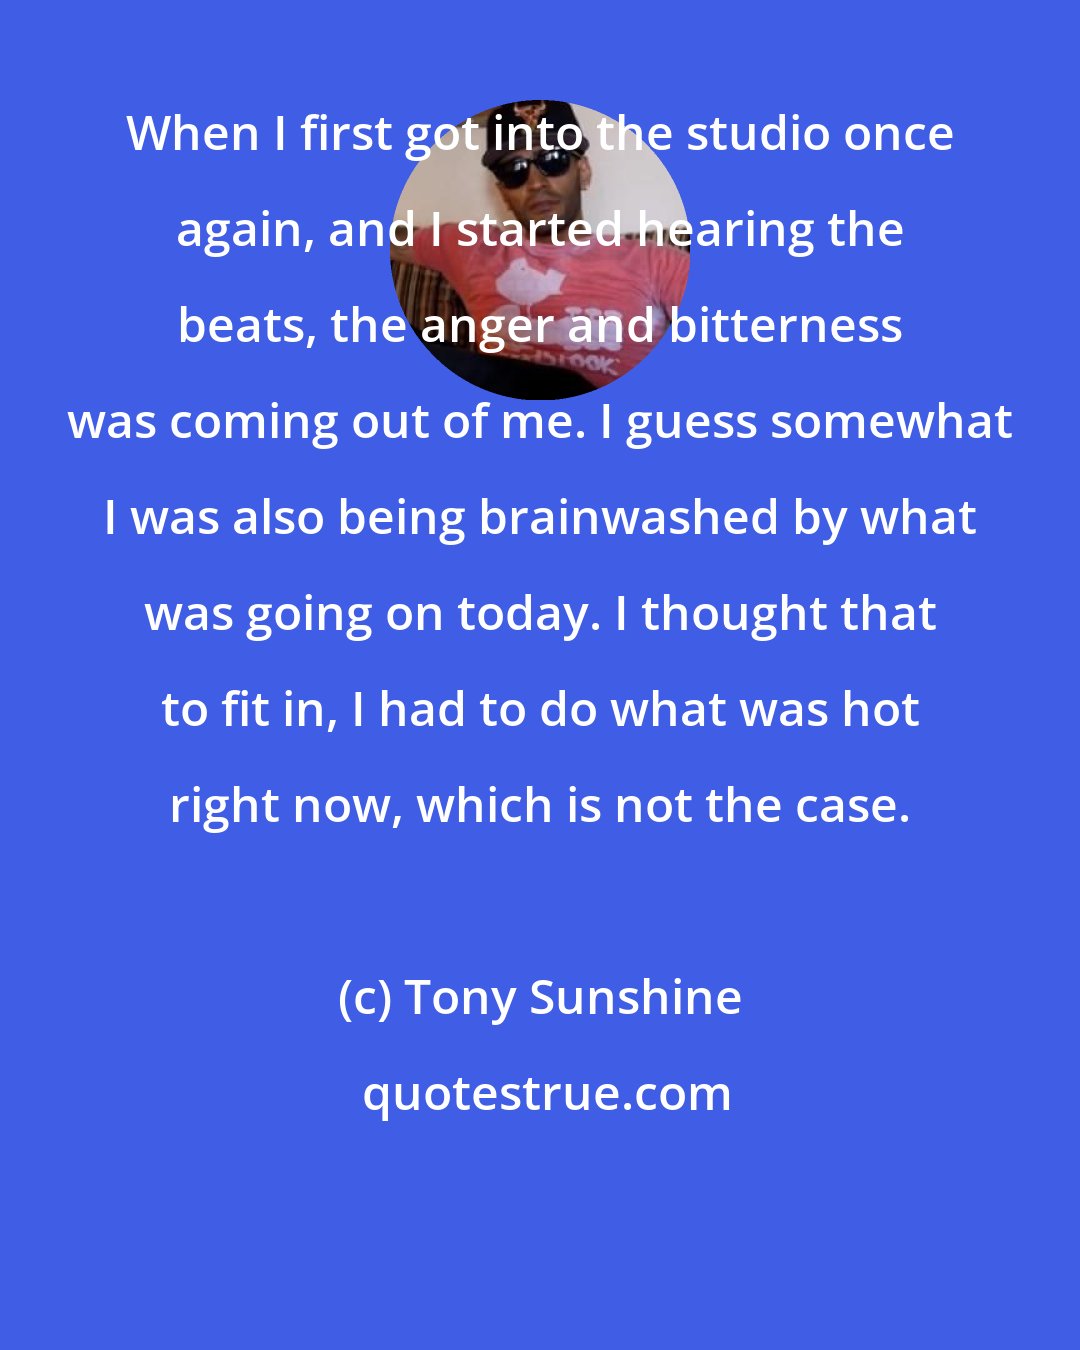 Tony Sunshine: When I first got into the studio once again, and I started hearing the beats, the anger and bitterness was coming out of me. I guess somewhat I was also being brainwashed by what was going on today. I thought that to fit in, I had to do what was hot right now, which is not the case.